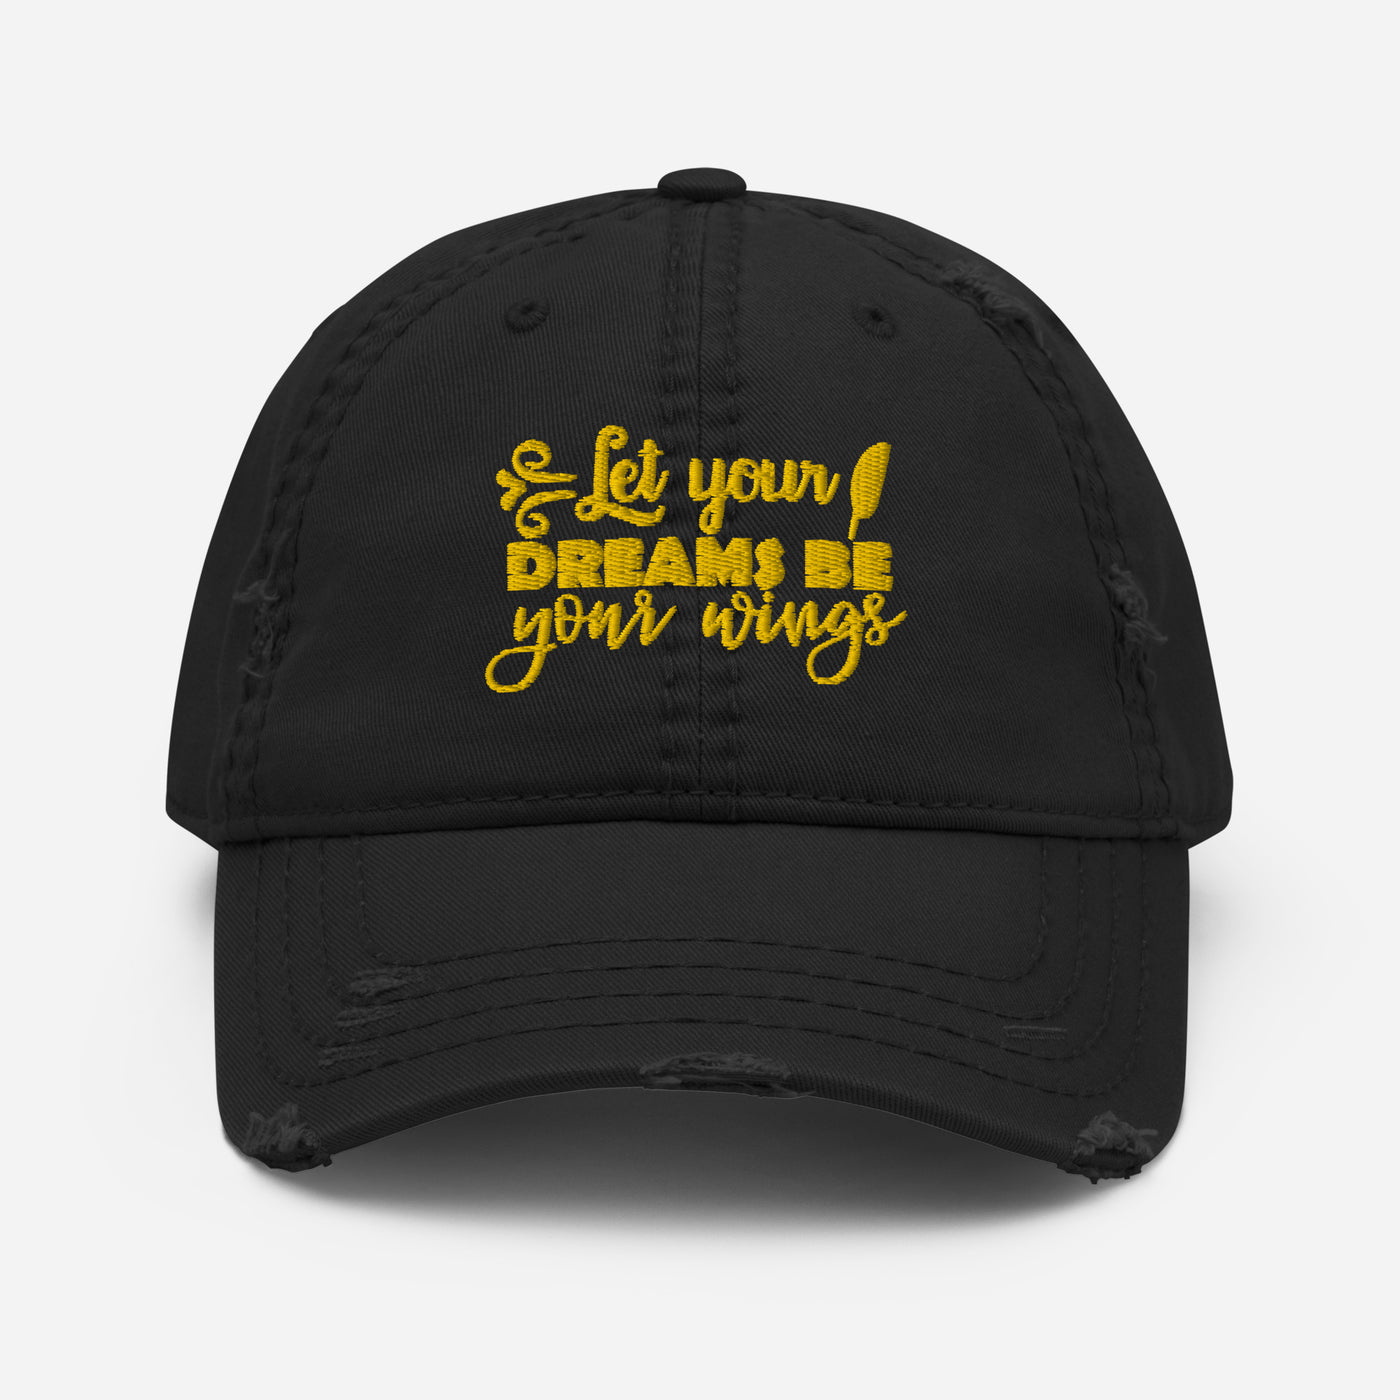 "Let Your Dreams Be Your Wings" Distressed Hat